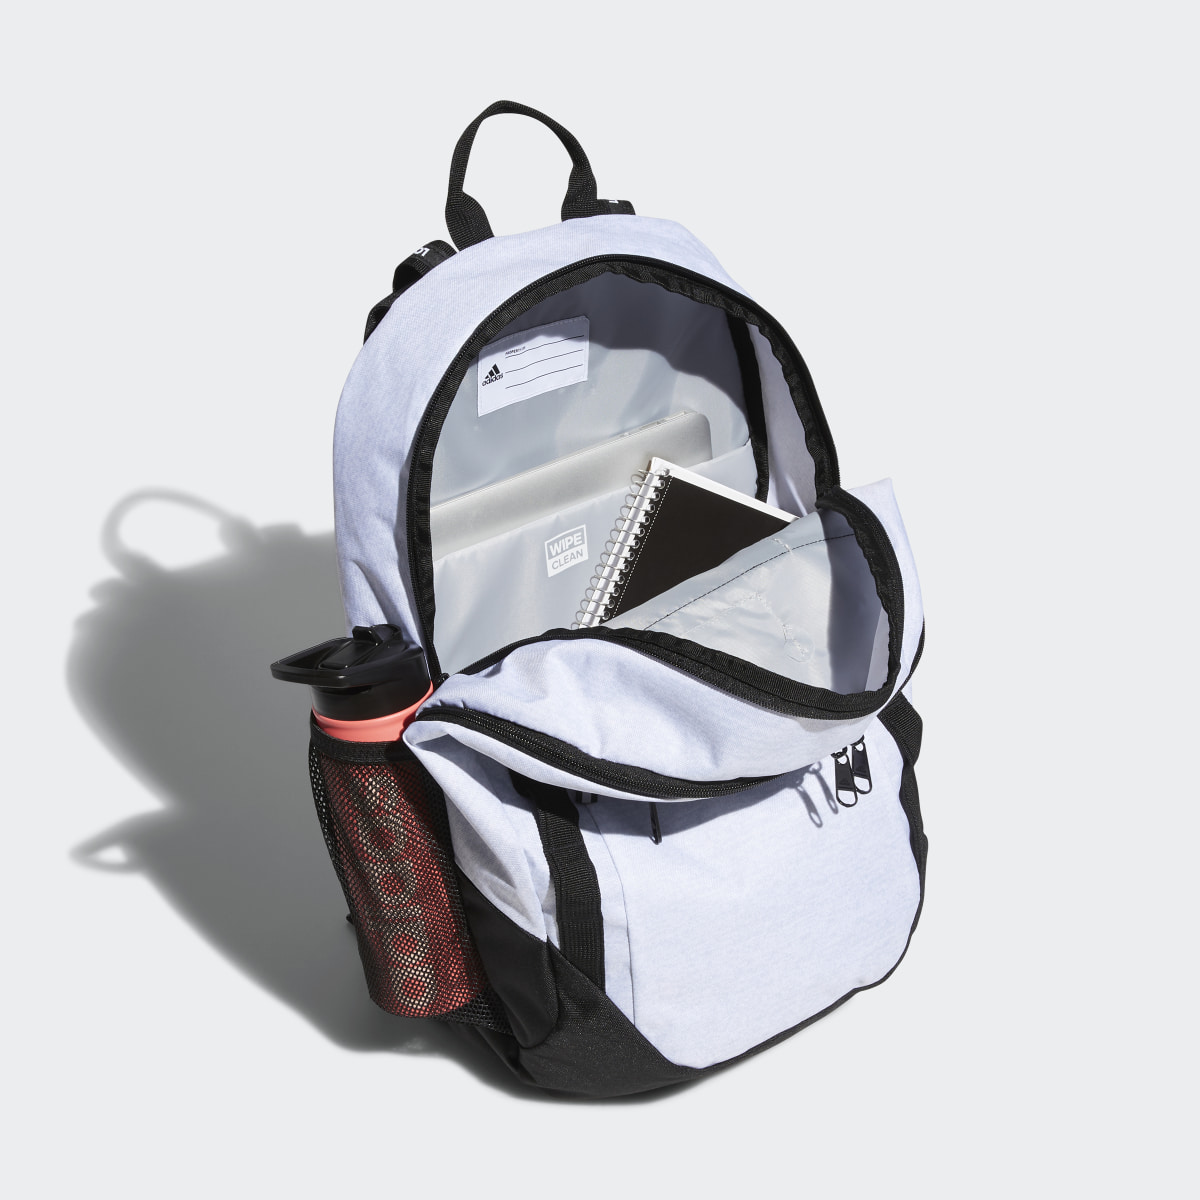 Adidas Excel Backpack. 5